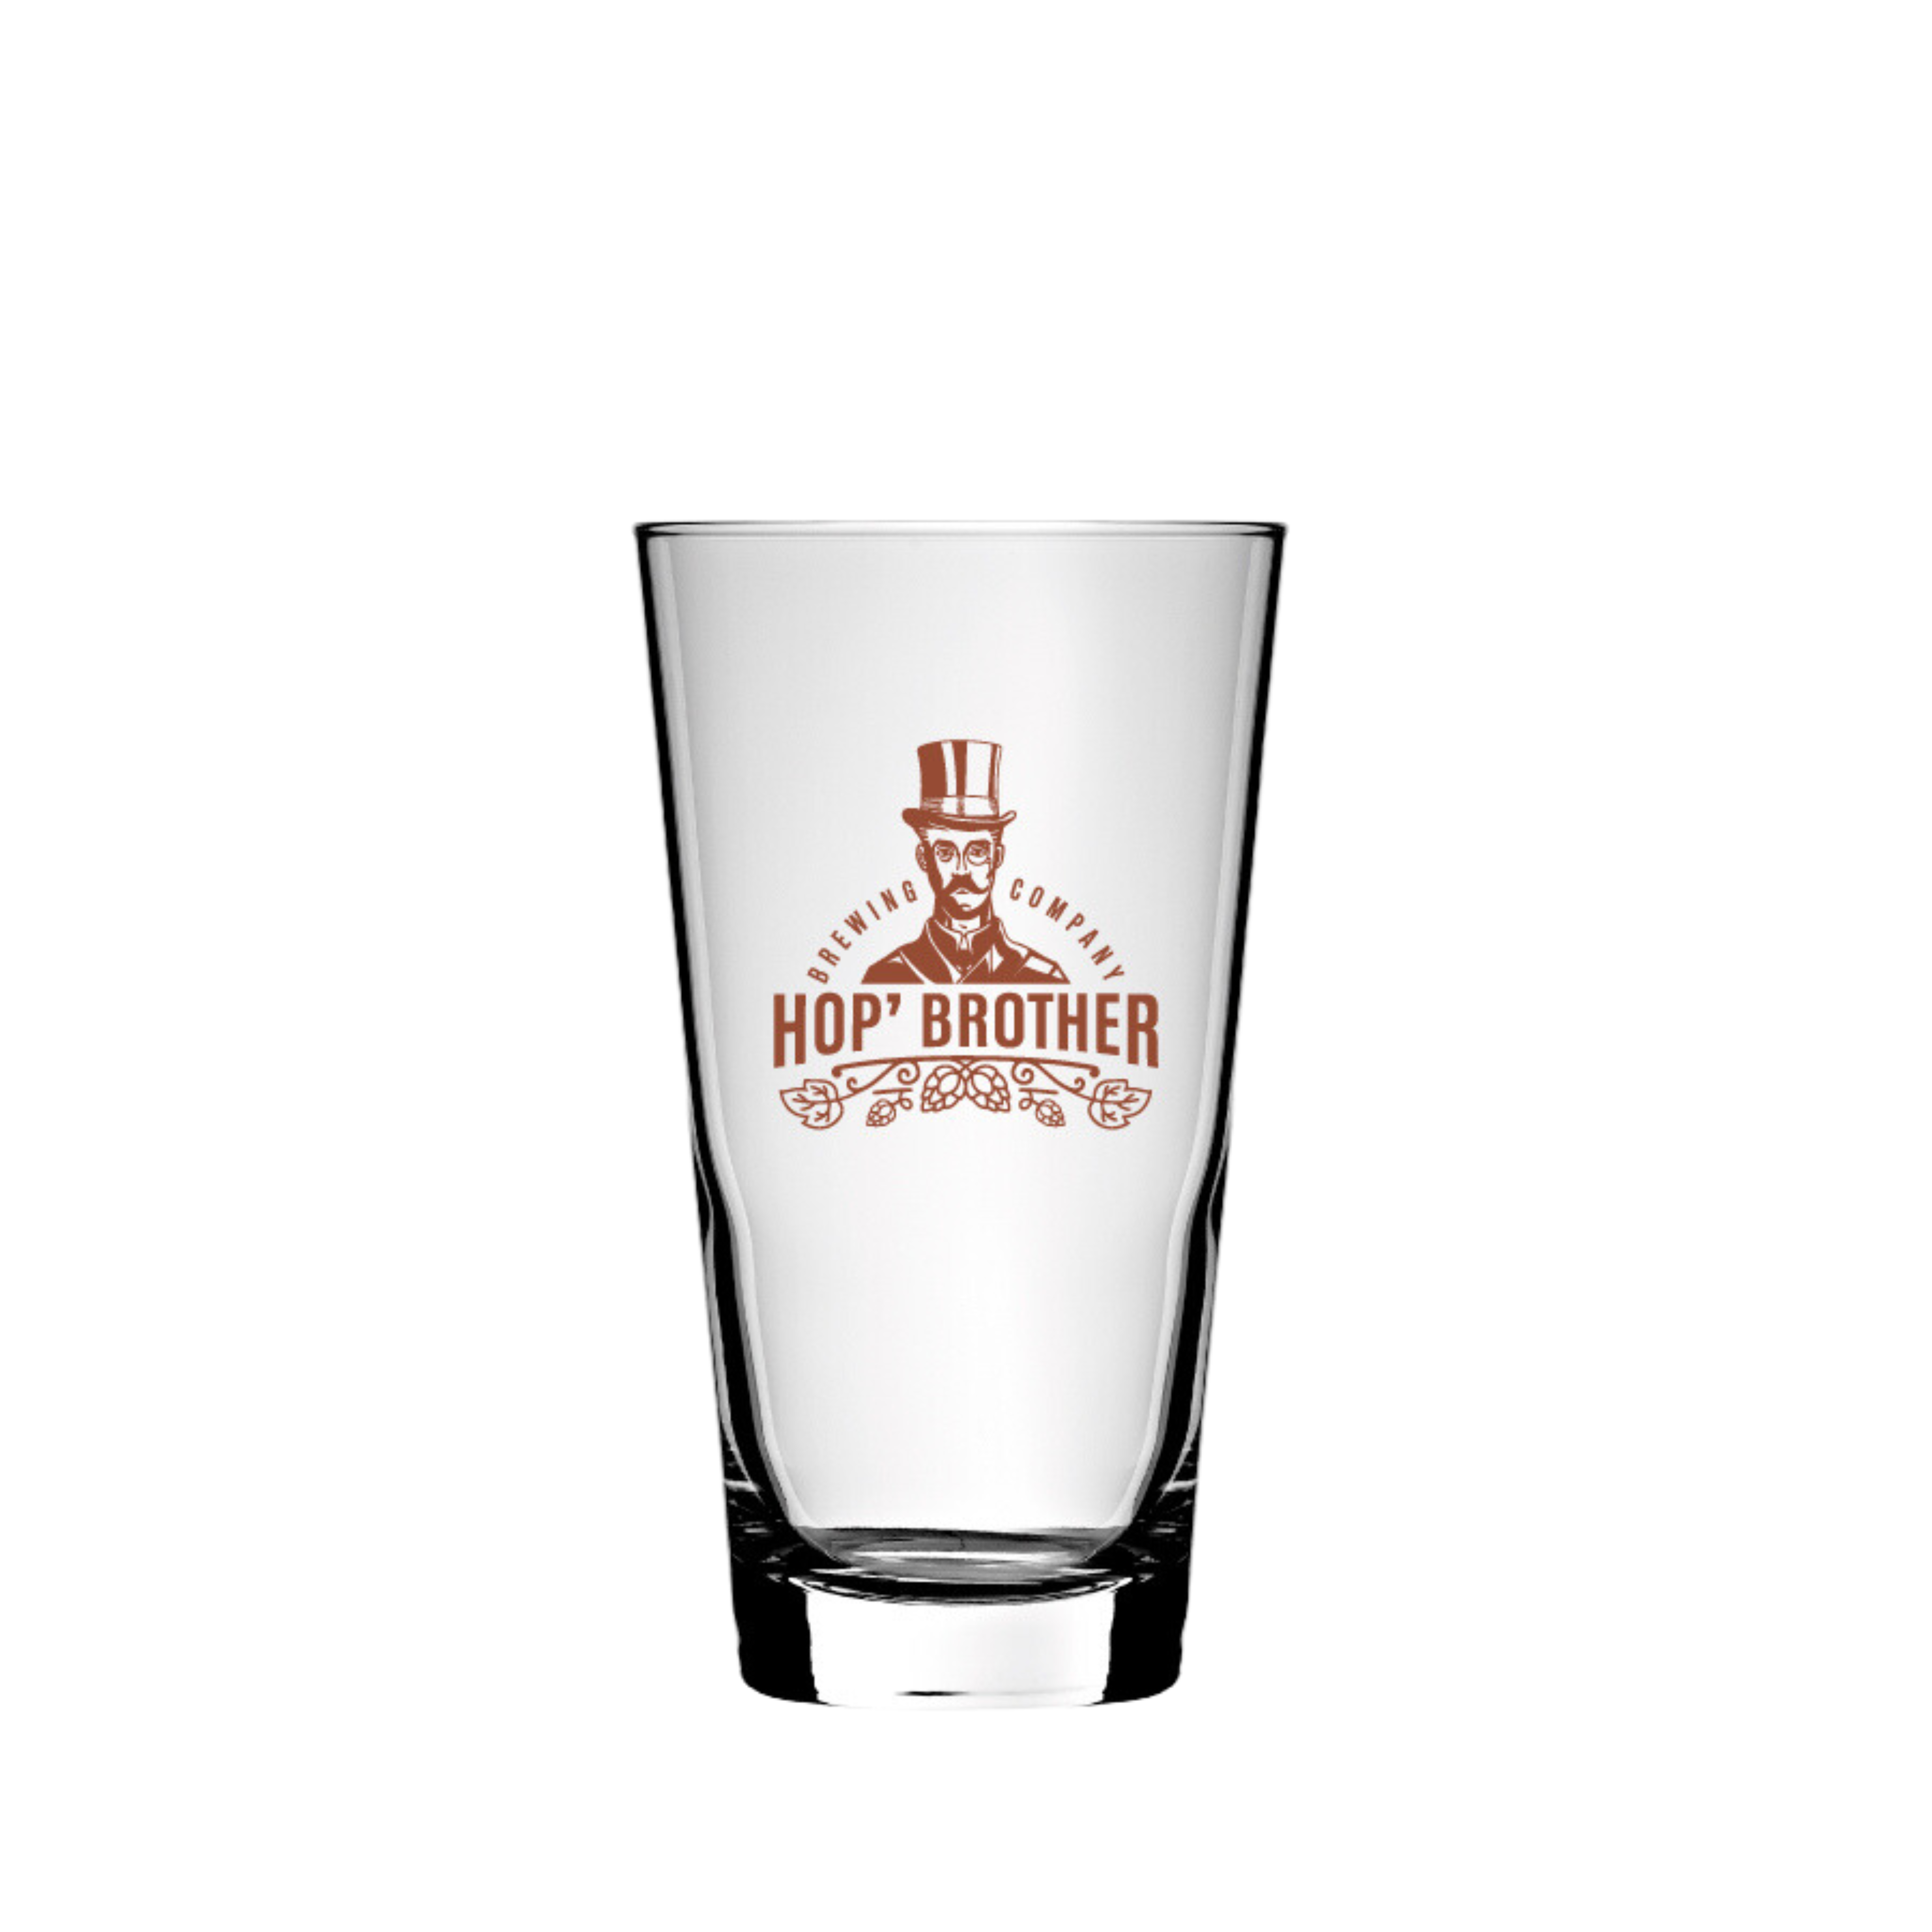 Personalised pint glass with brauwn graphic design of Hop brother.